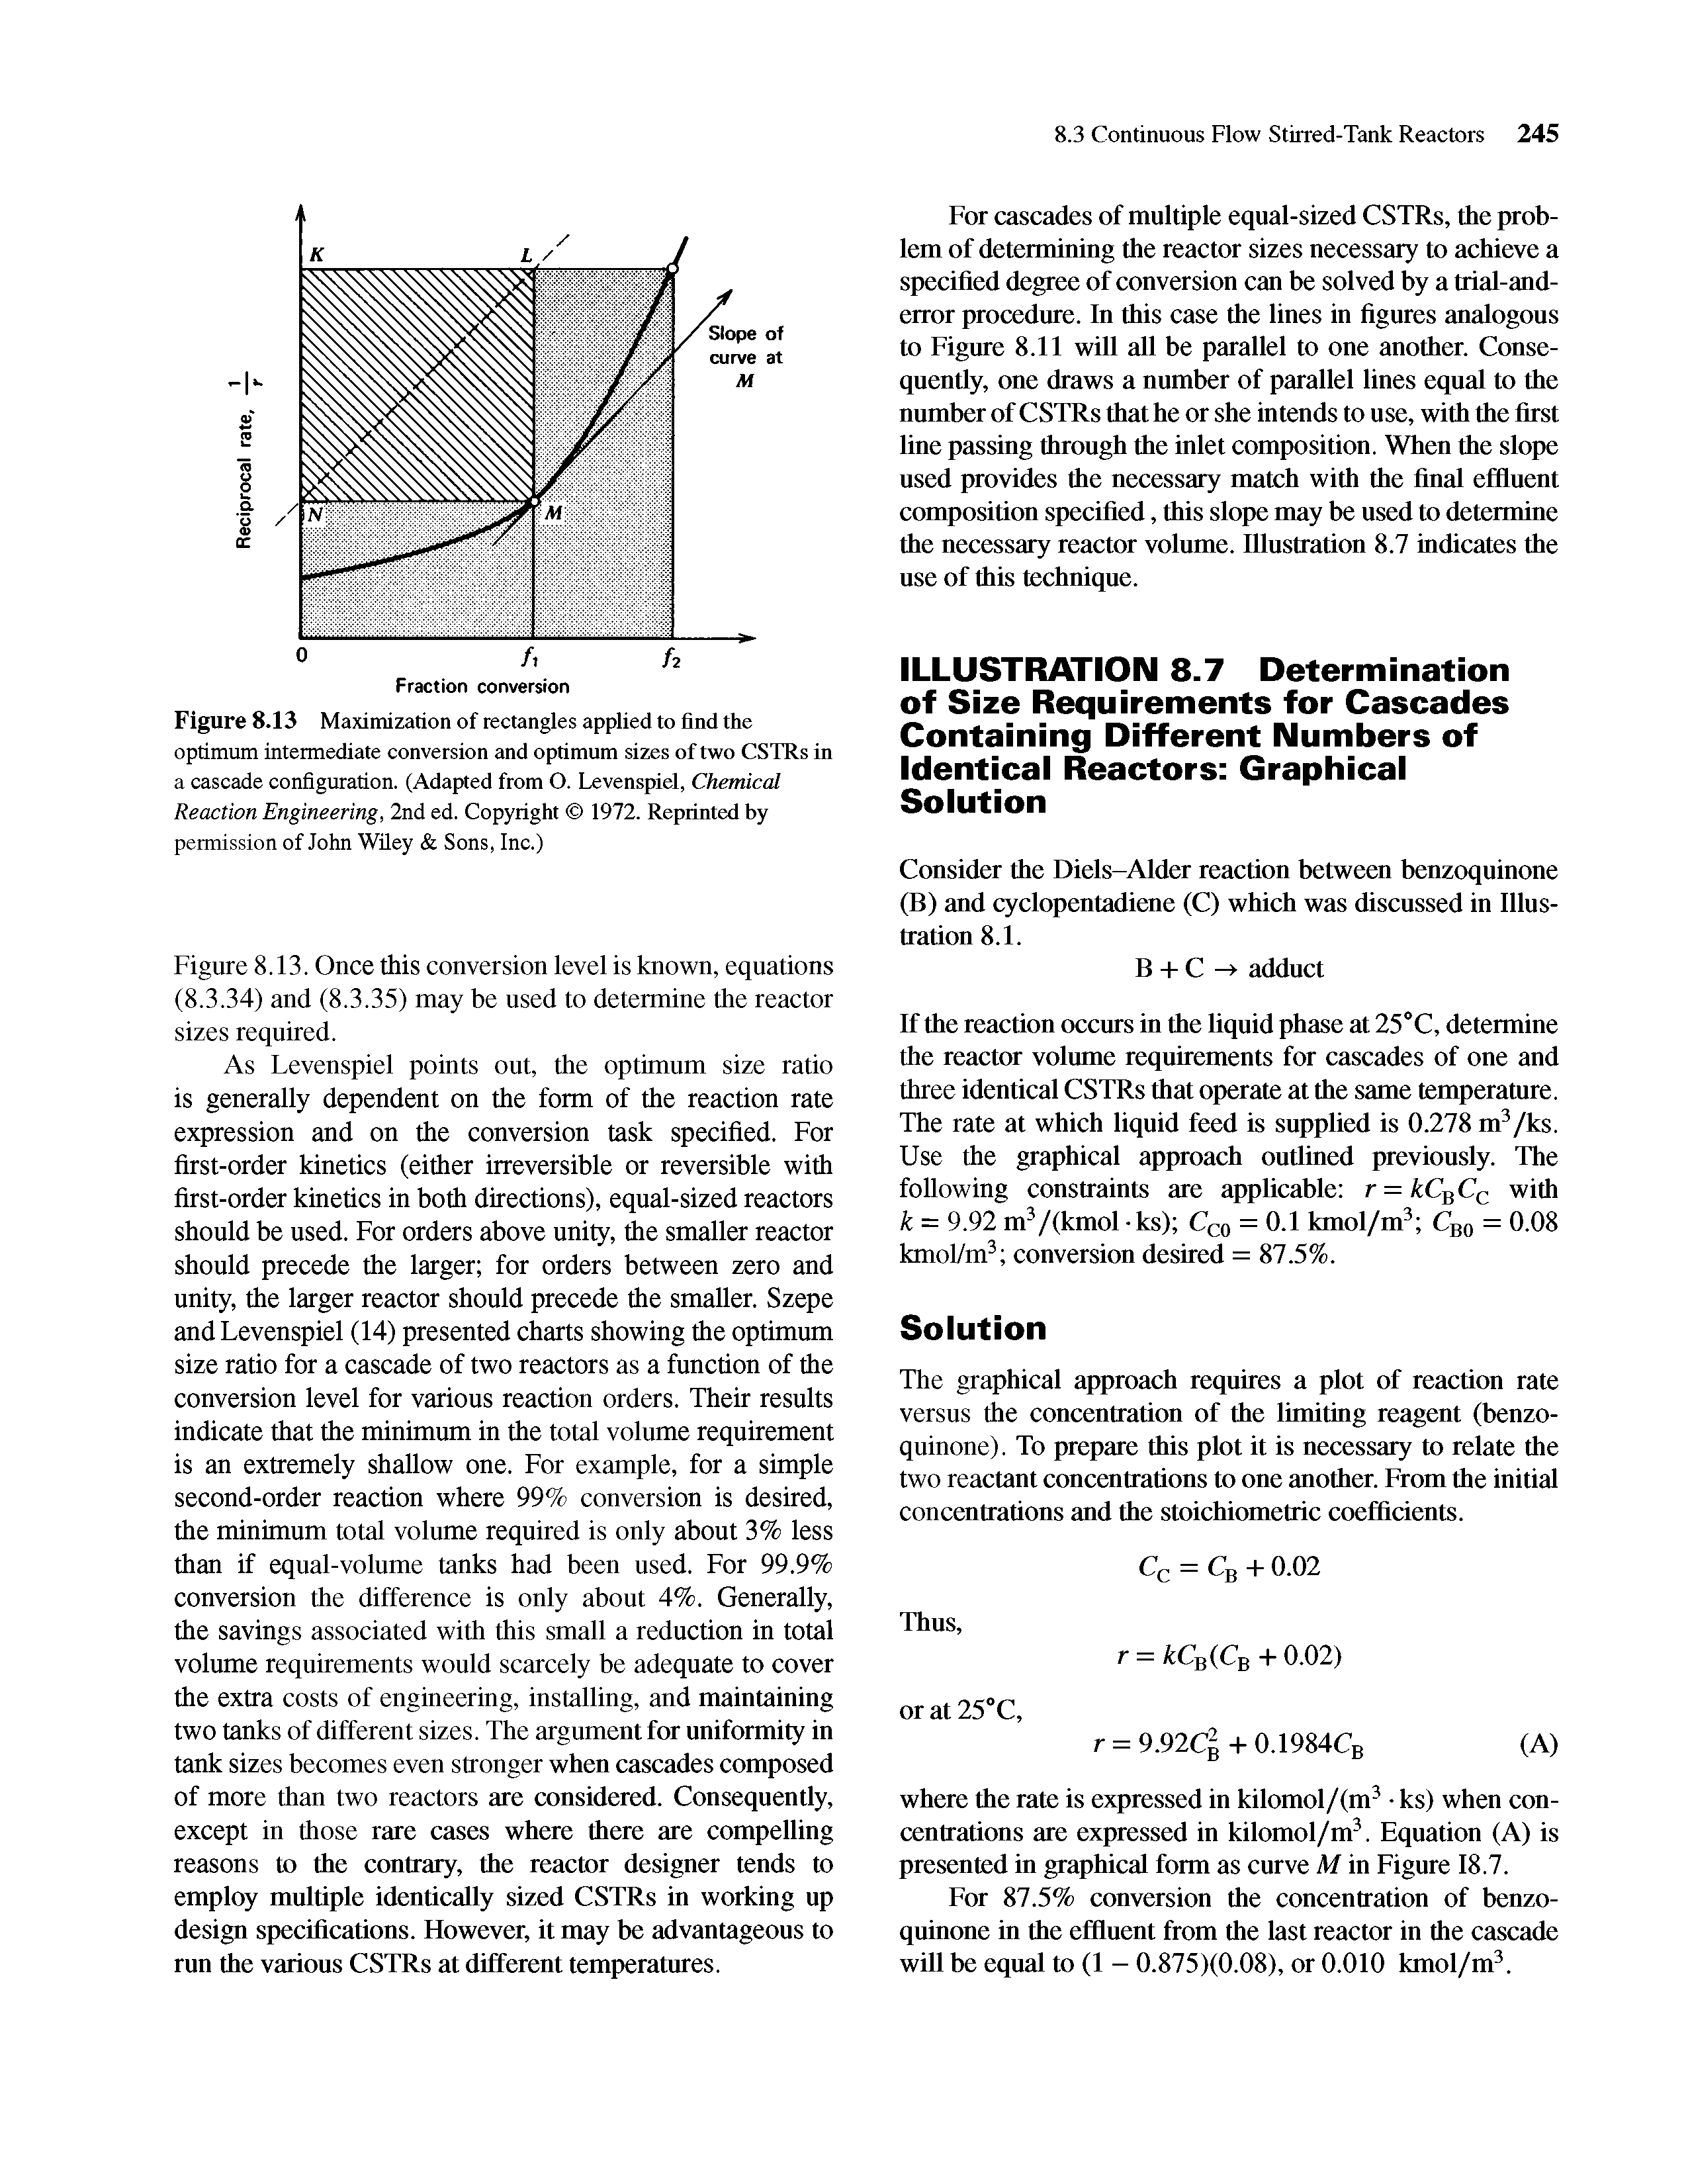 Figure 8.13 Maximization of rectangles applied to find the optimum intermediate conversion and optimum sizes of two CSTRs in a cascade configuration. (Adapted from O. Levenspiel, Chemical Reaction Engineering, 2nd ed. Copyright 1972. Reprinted by permission of John WUey Sons, Inc.)...